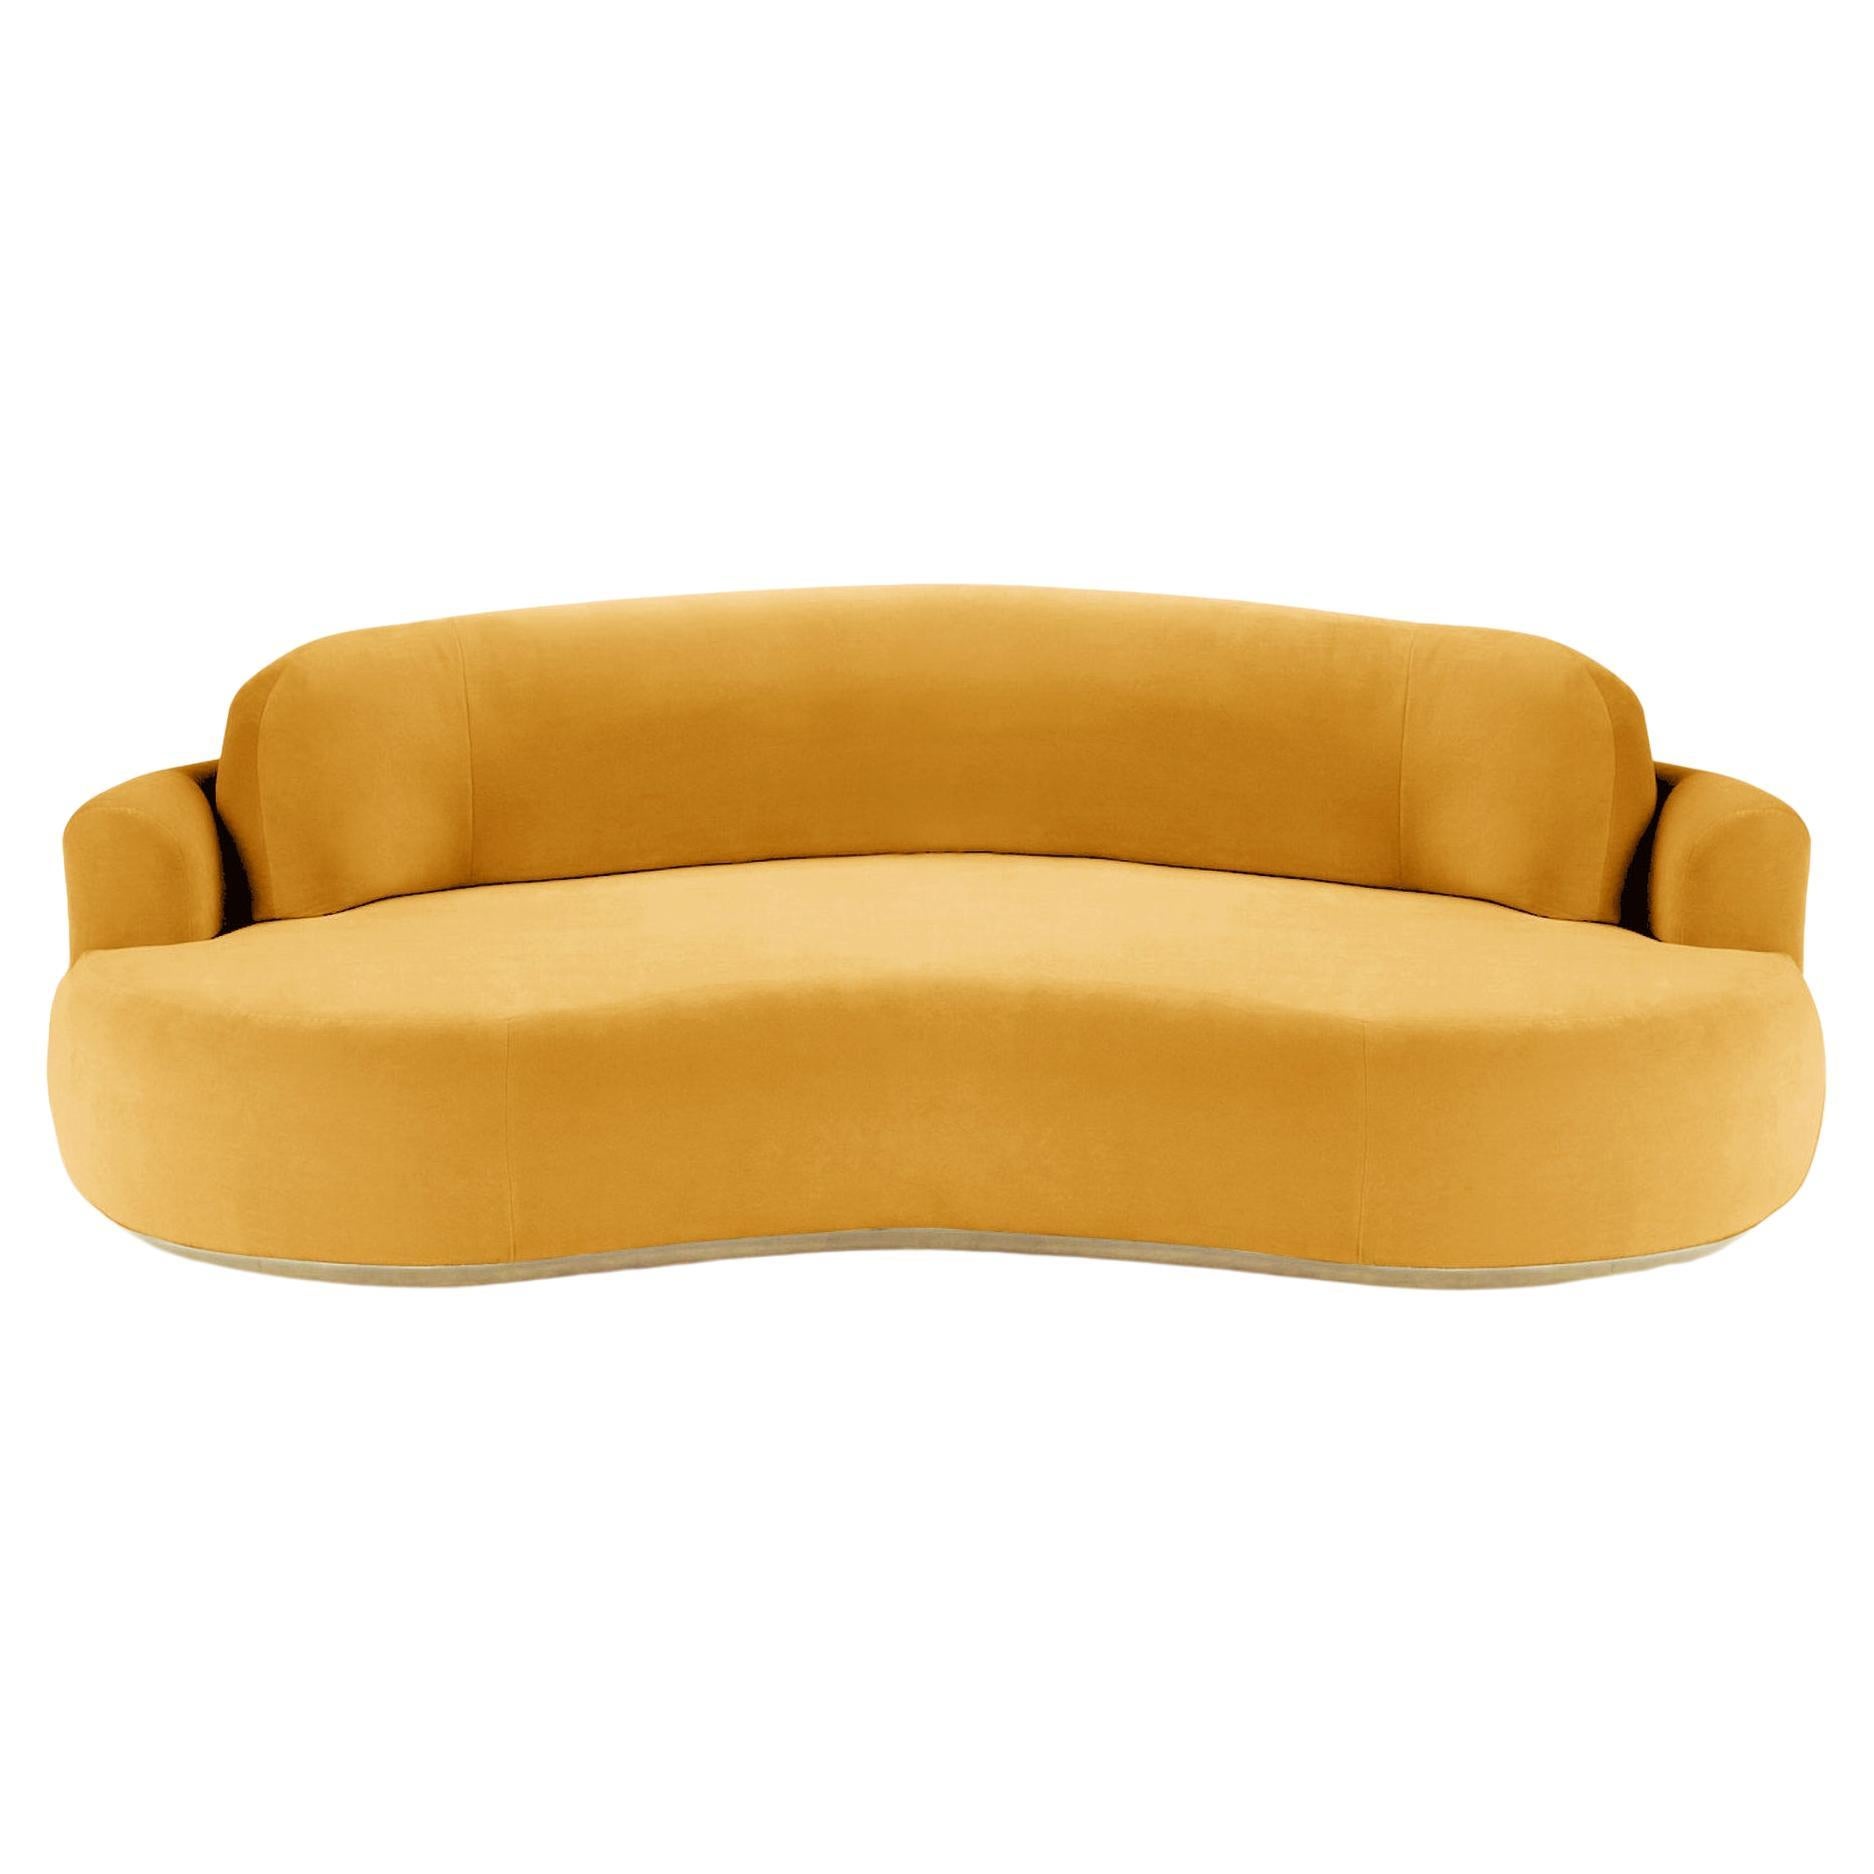 Naked Round Sofa, Small with Natural Oak and Corn For Sale